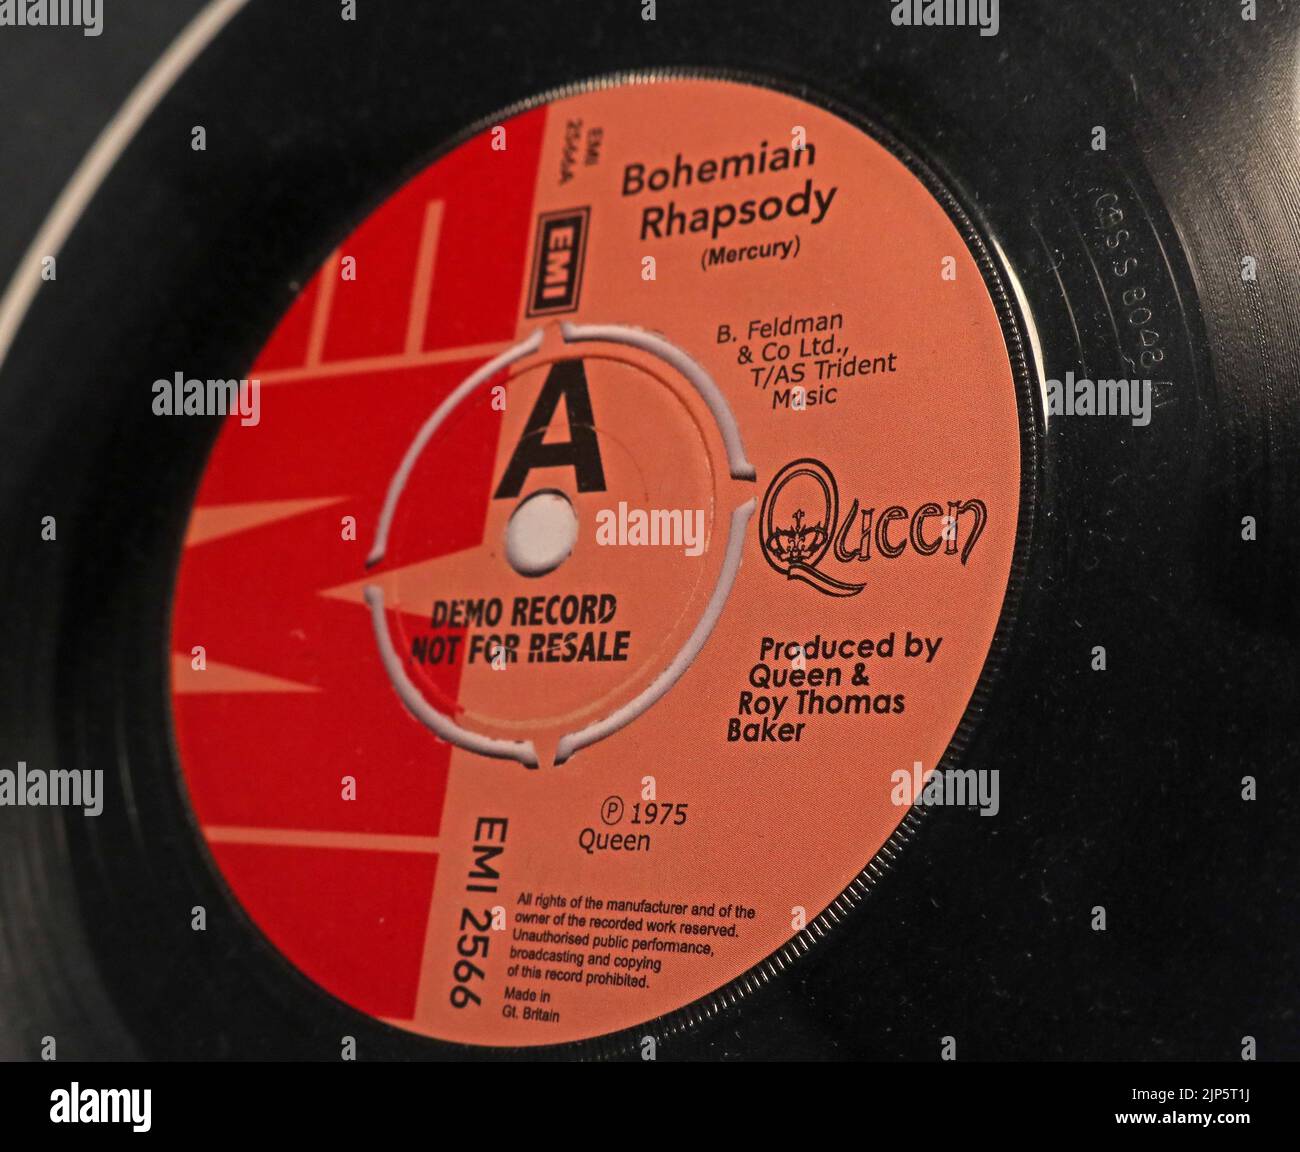 EMI 2566, Demo Record Not For sale, Queen, Bohemian Rhapsody, 1975, produced by Roy Thomas Baker Stock Photo